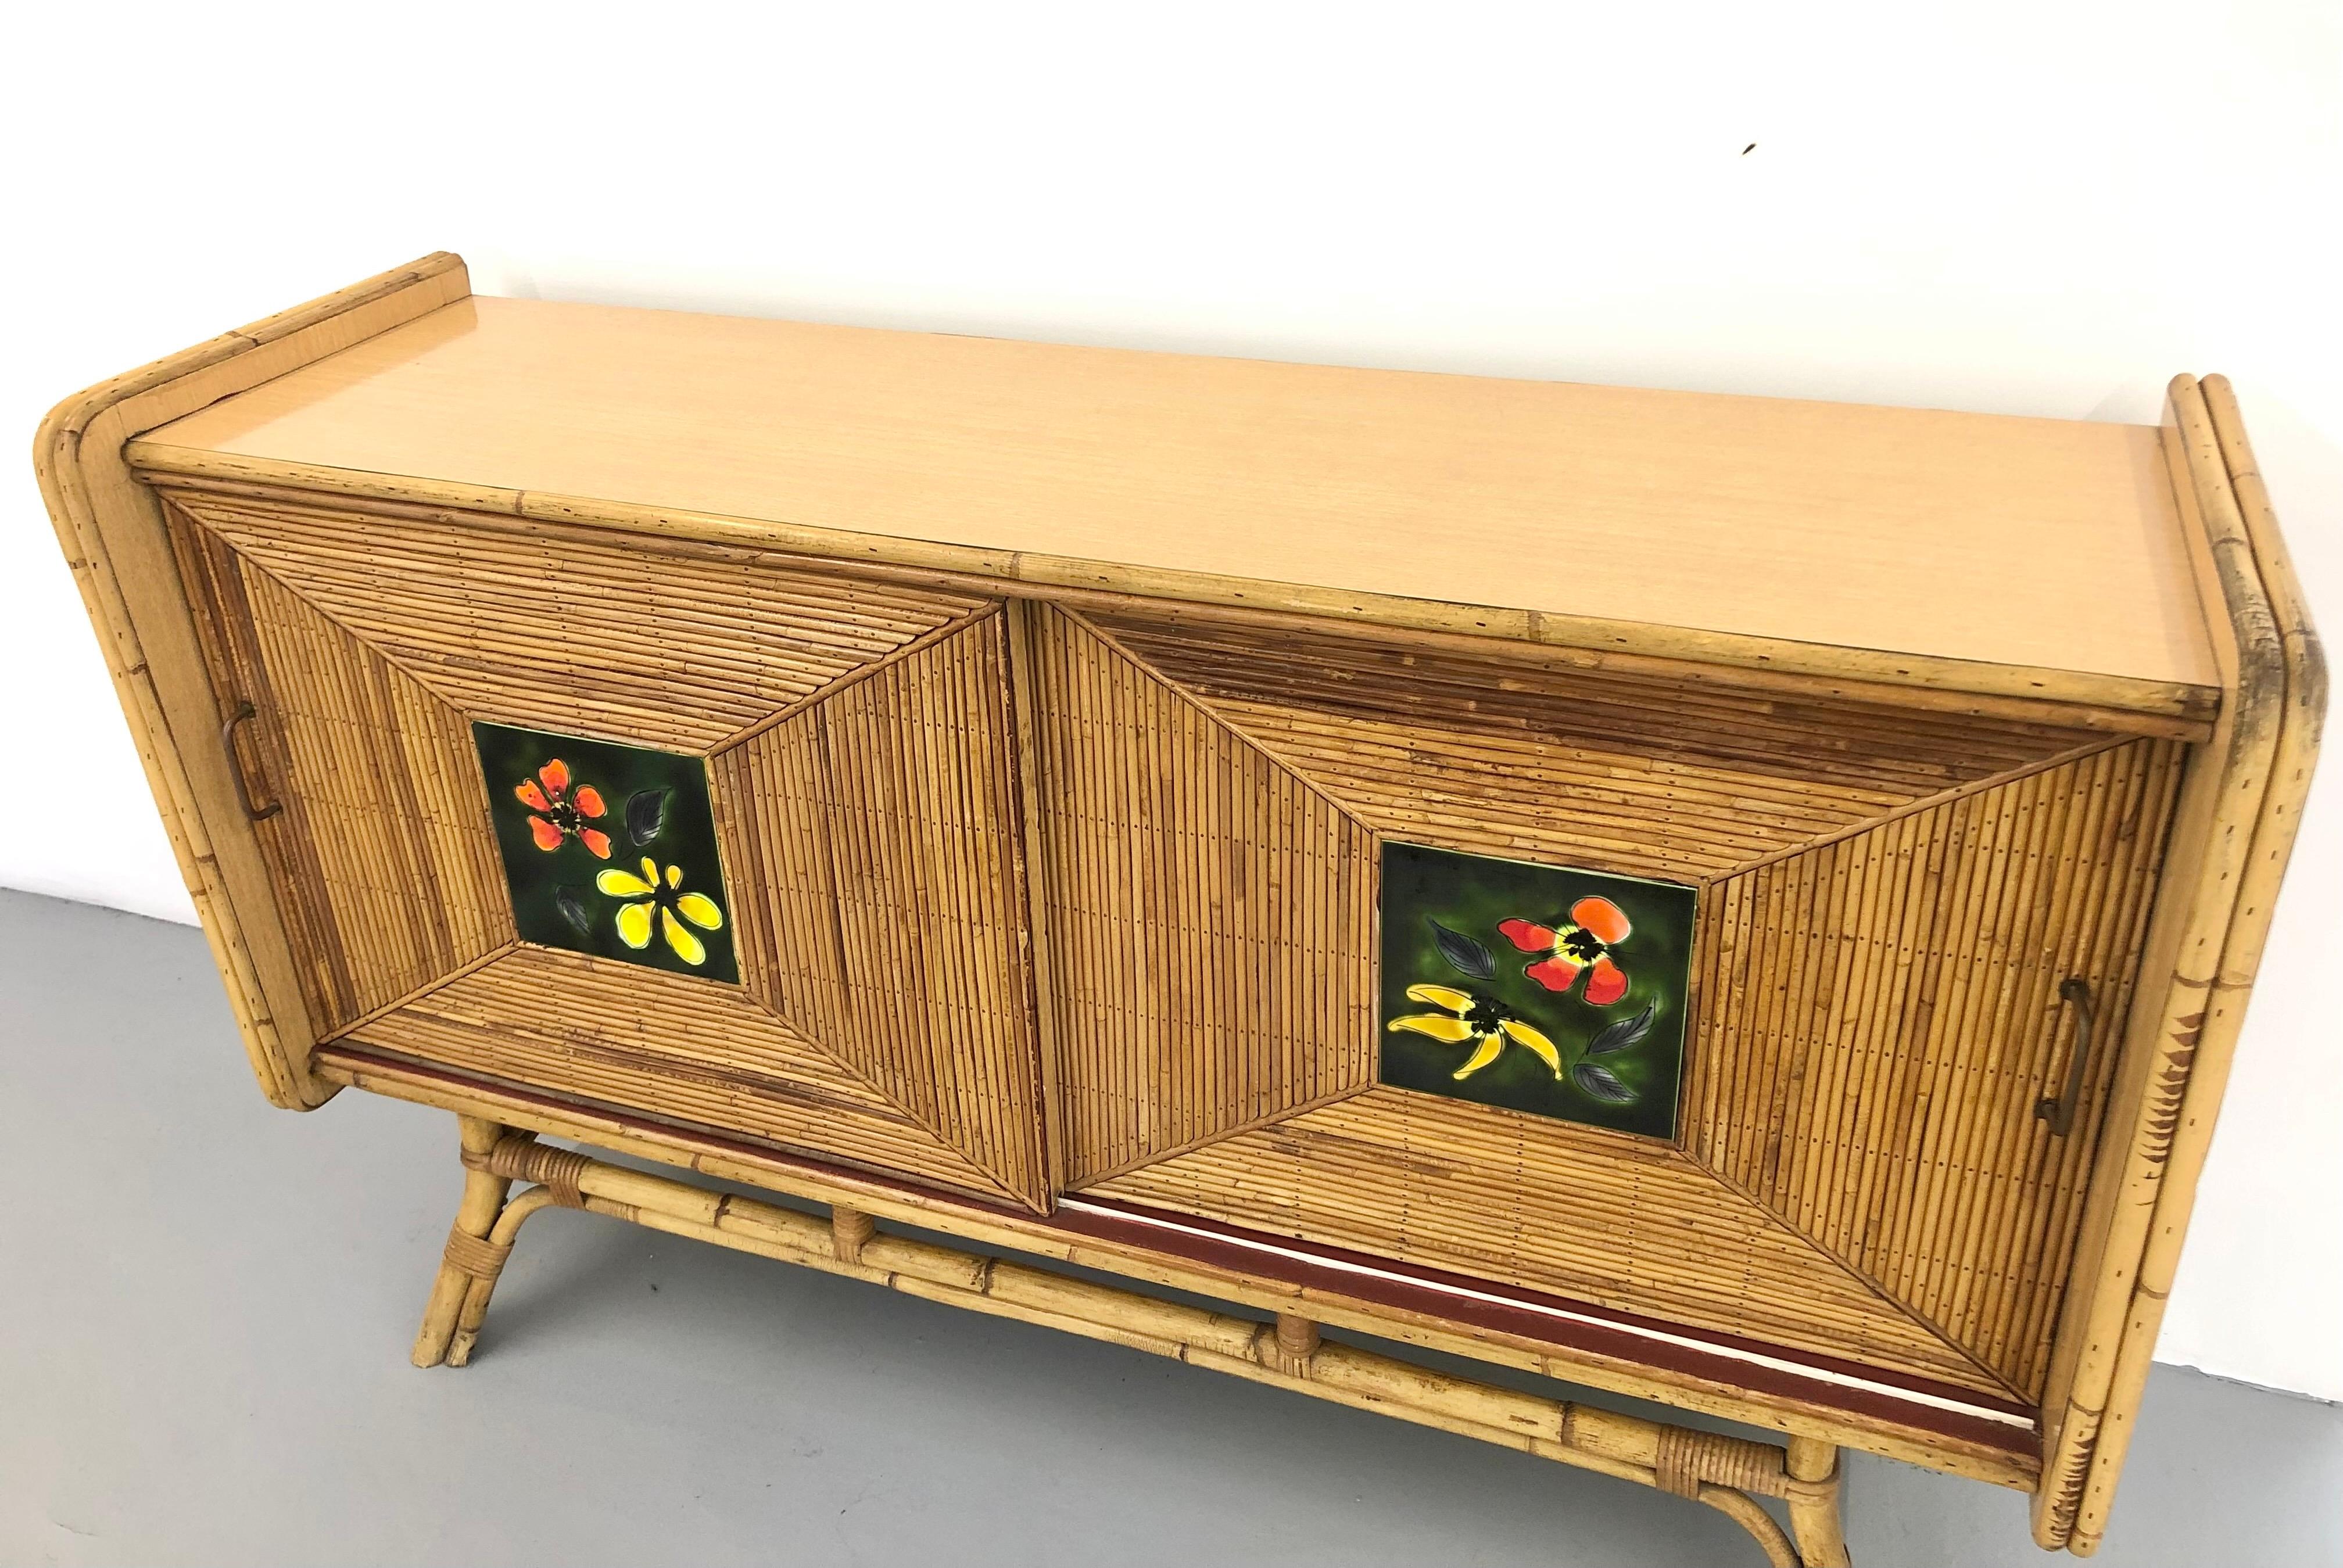 Magnificent and charming split pencil bamboo sideboard from the 1950s by Adrien Audoux and Frida Minet.
